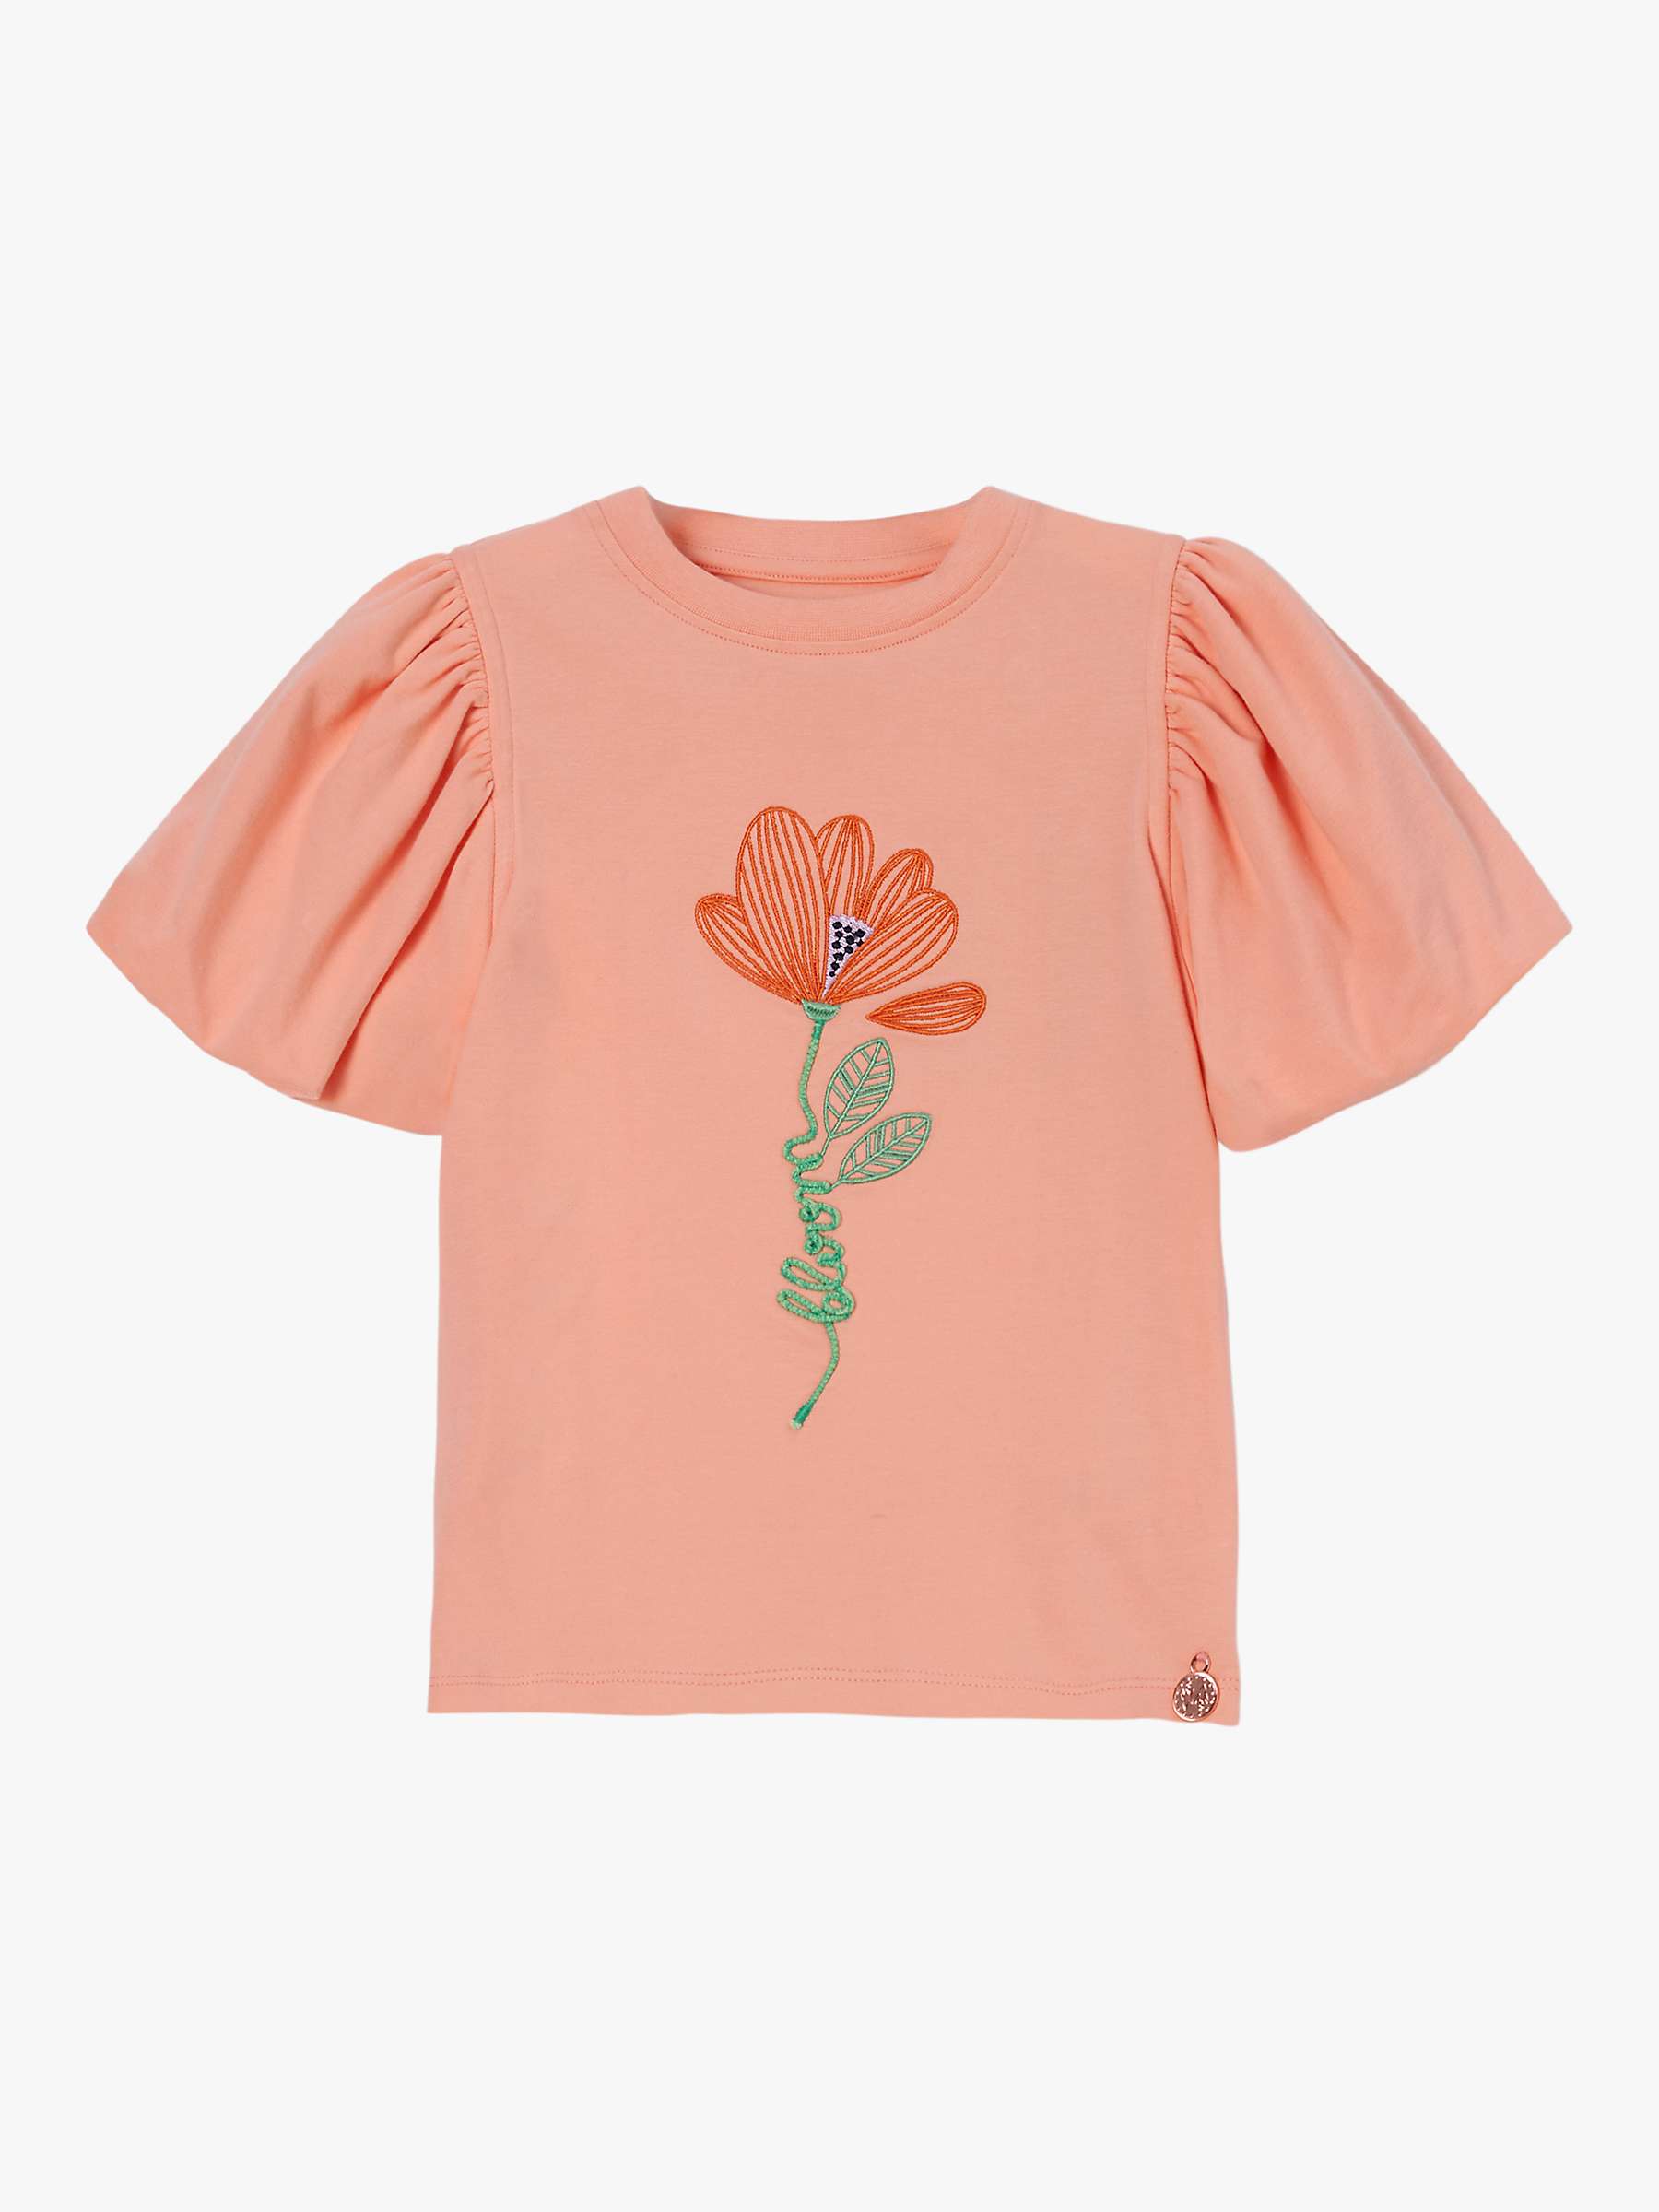 Buy Angel & Rocket Kids' Embroidered Puff Sleeve Top, Apricot Online at johnlewis.com